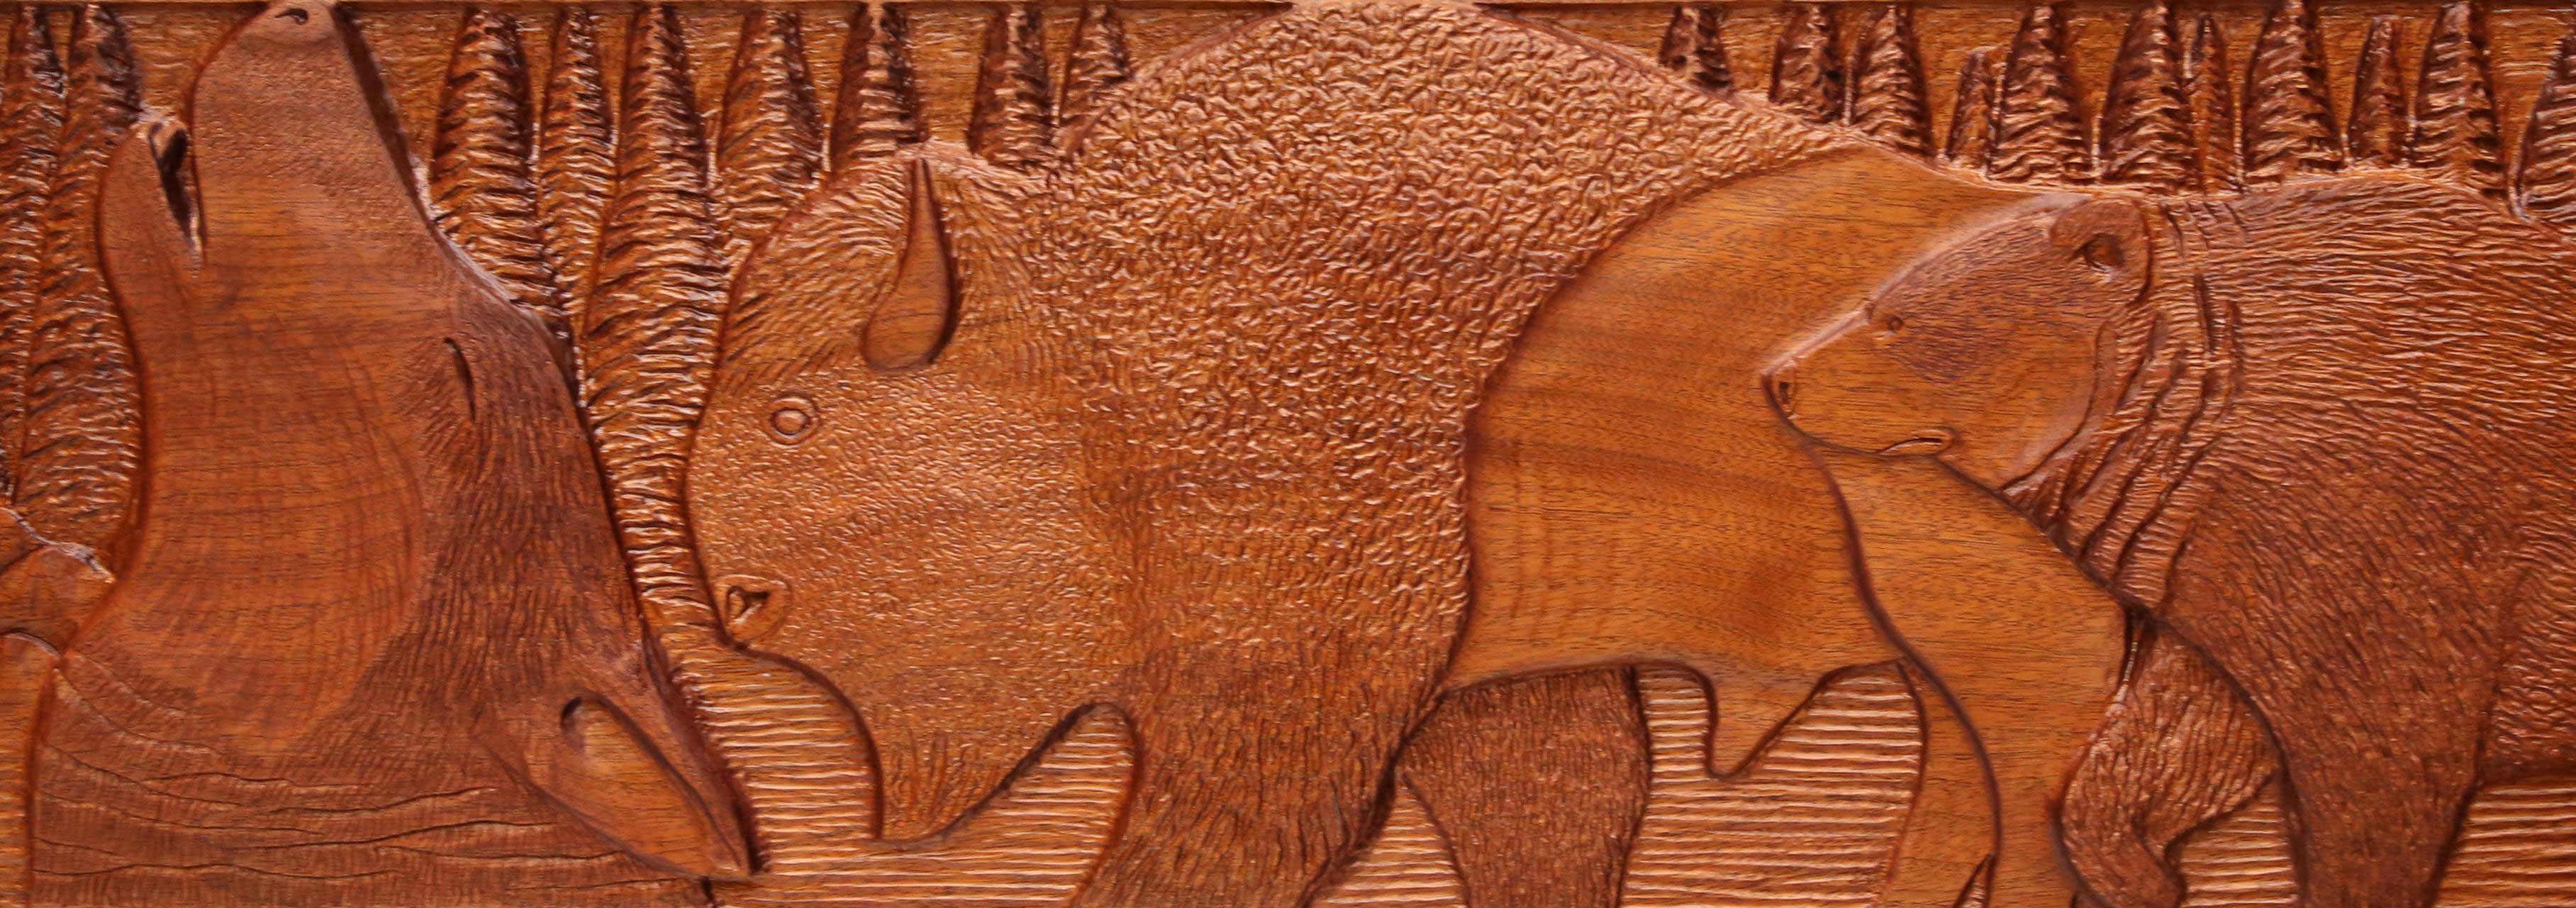 a detail from the Seven Sacred Teachings showing a wolf, a bison and a bear